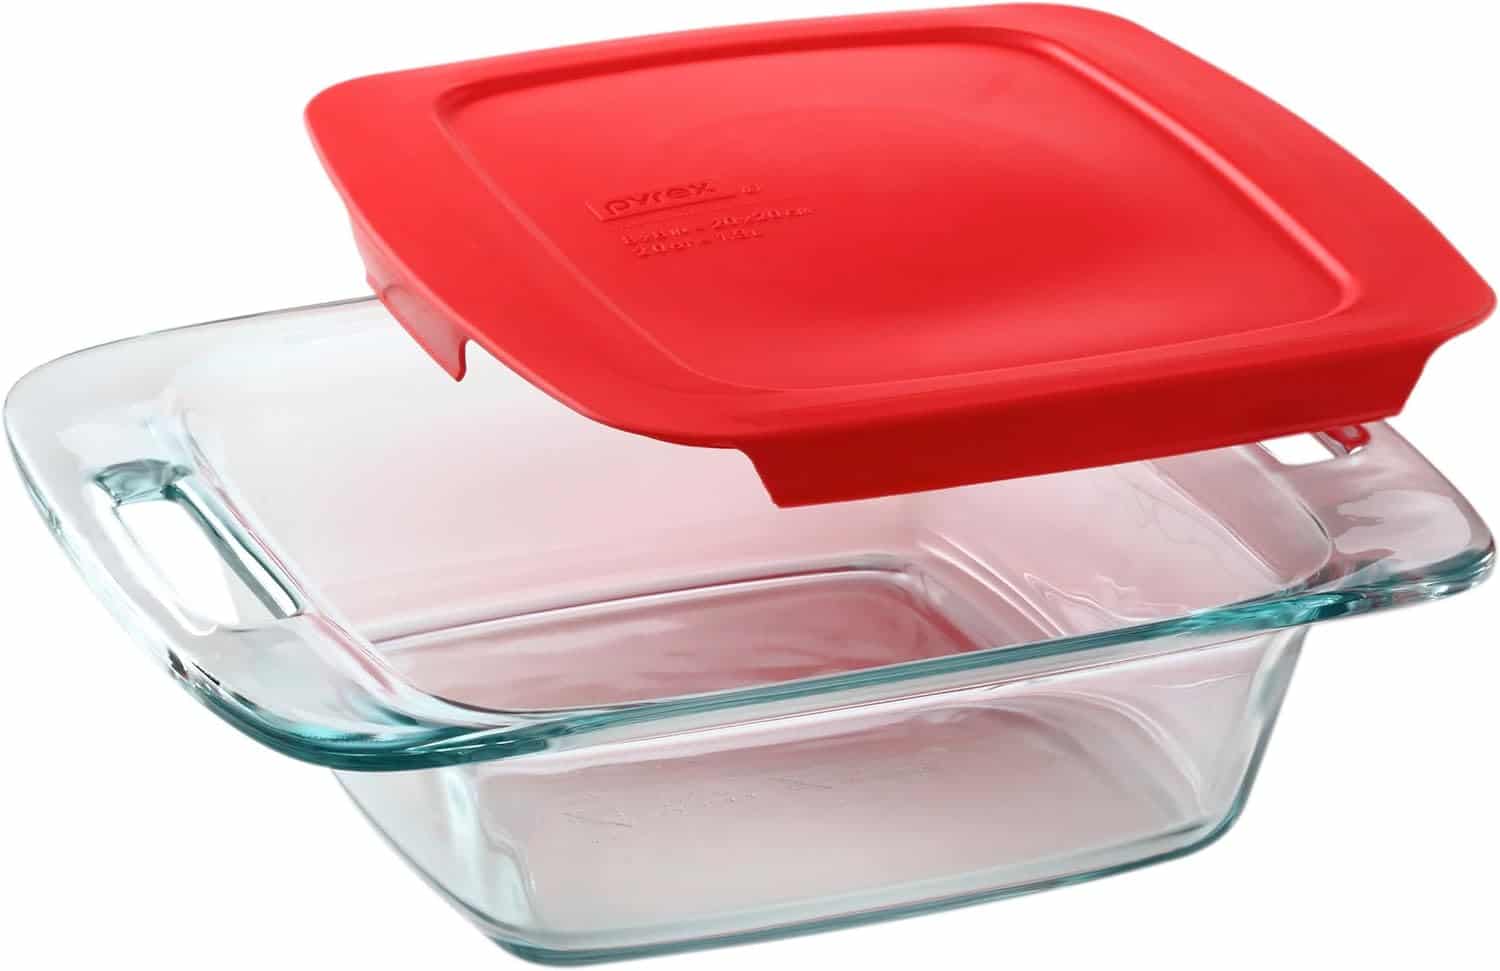 8x8 glass pyrex dish with cover.